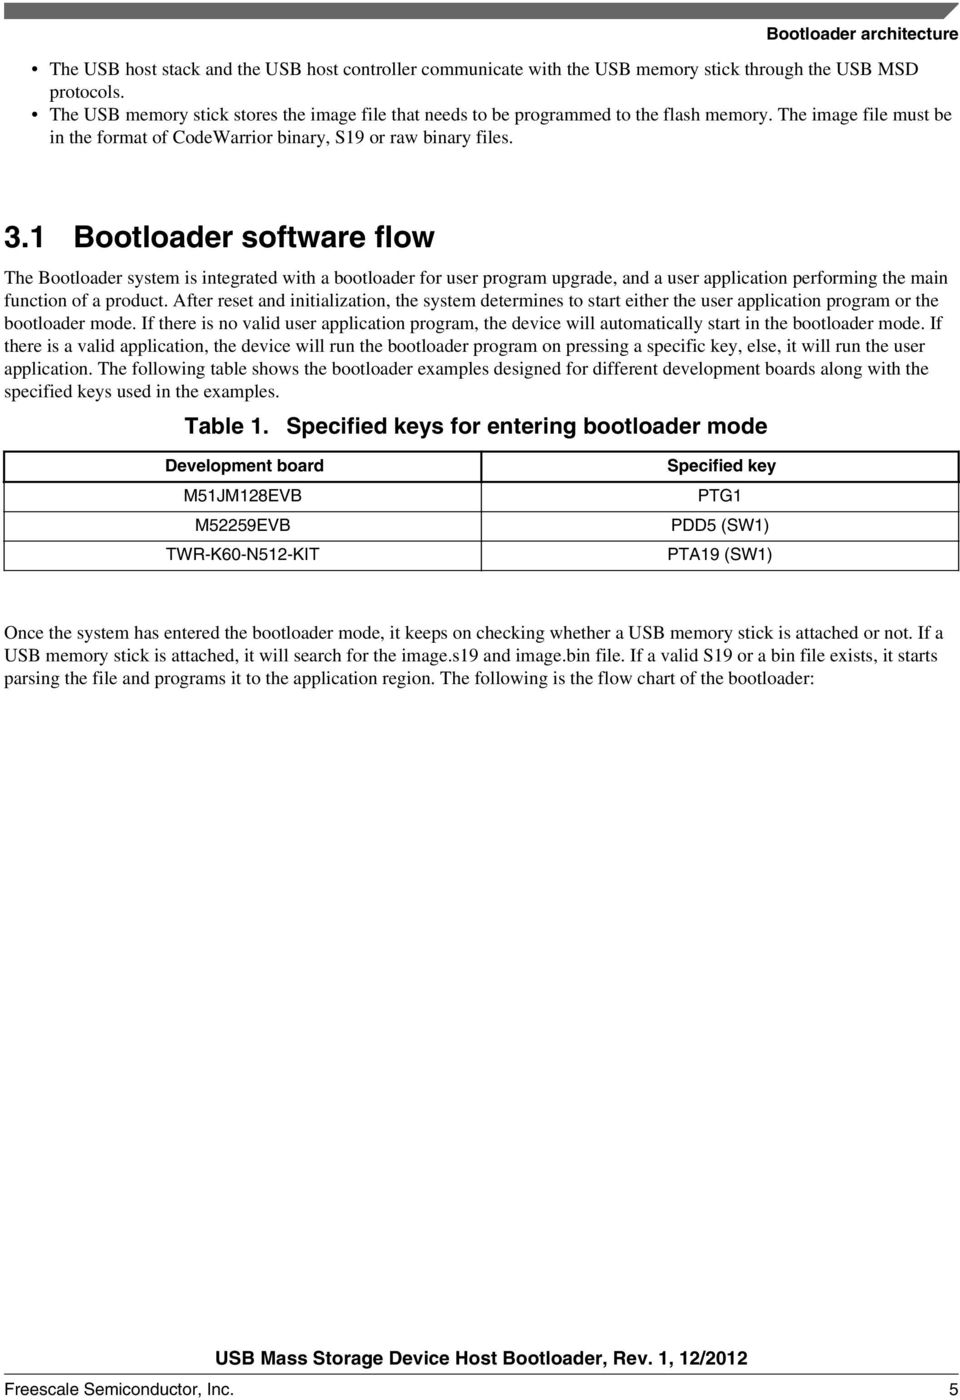 1 Bootloader software flow The Bootloader system is integrated with a bootloader for user program upgrade, and a user application performing the main function of a product.